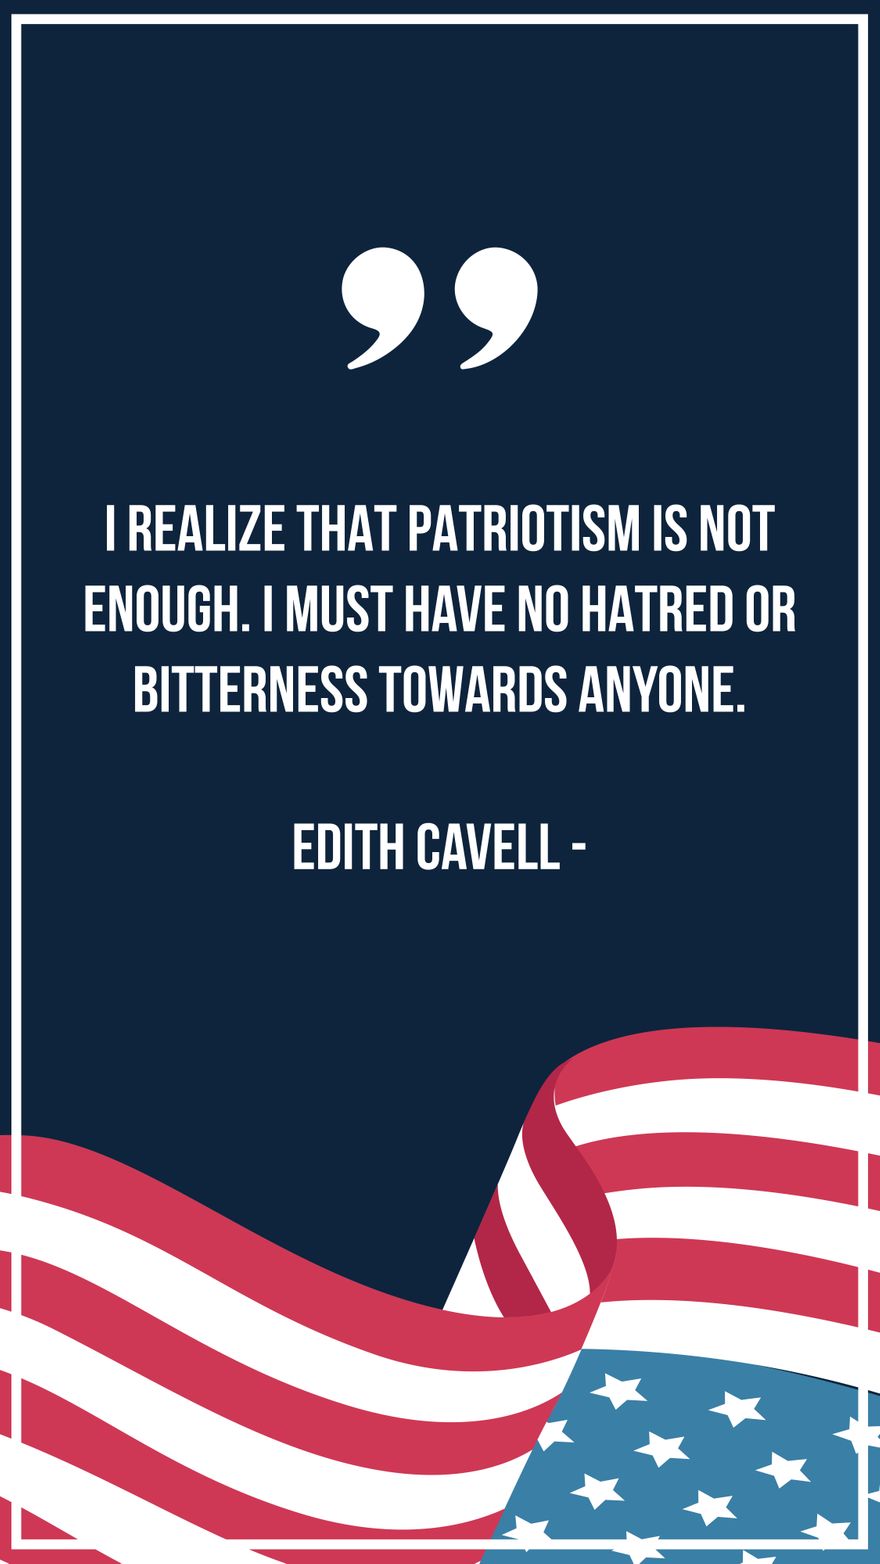 Free Edith Cavell - I realize that patriotism is not enough. I must have no hatred or bitterness towards anyone.